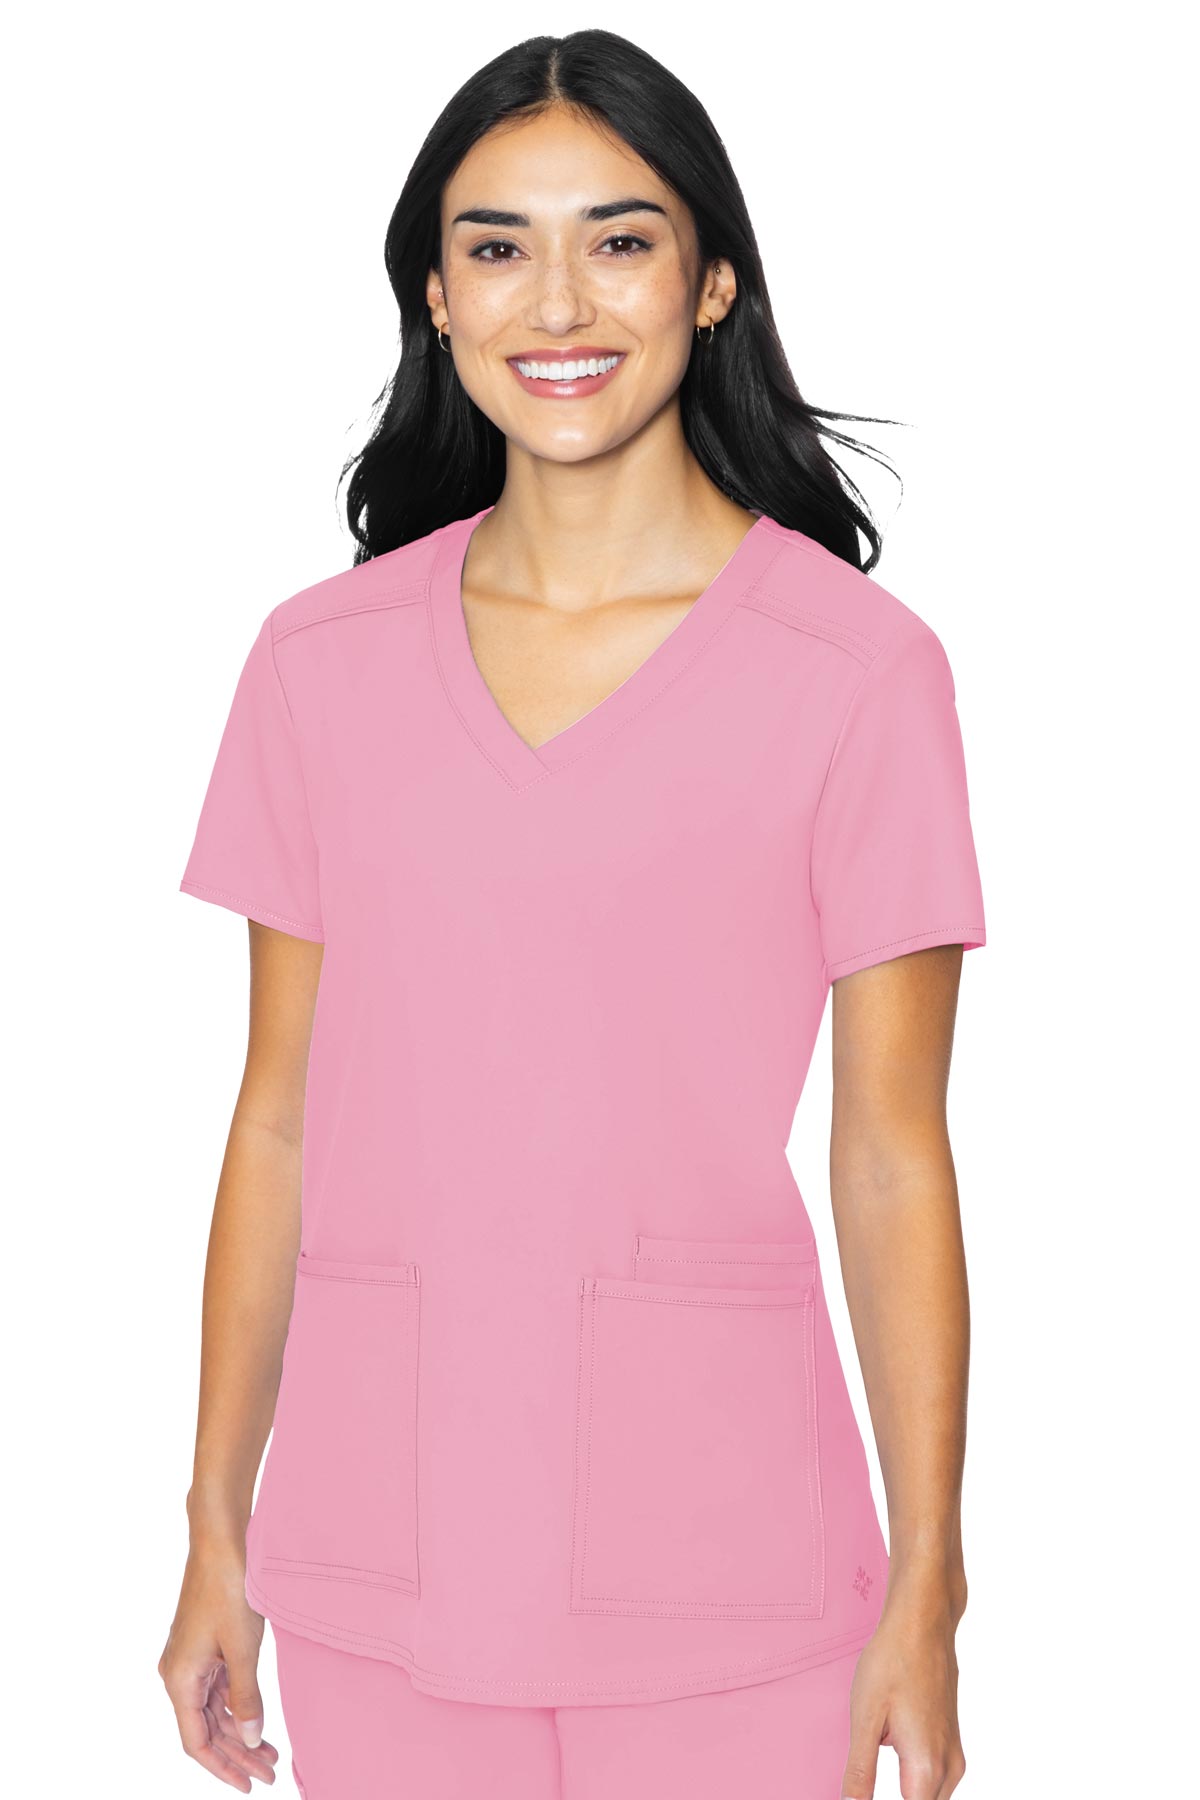 Med Couture Taffy Pink TOP